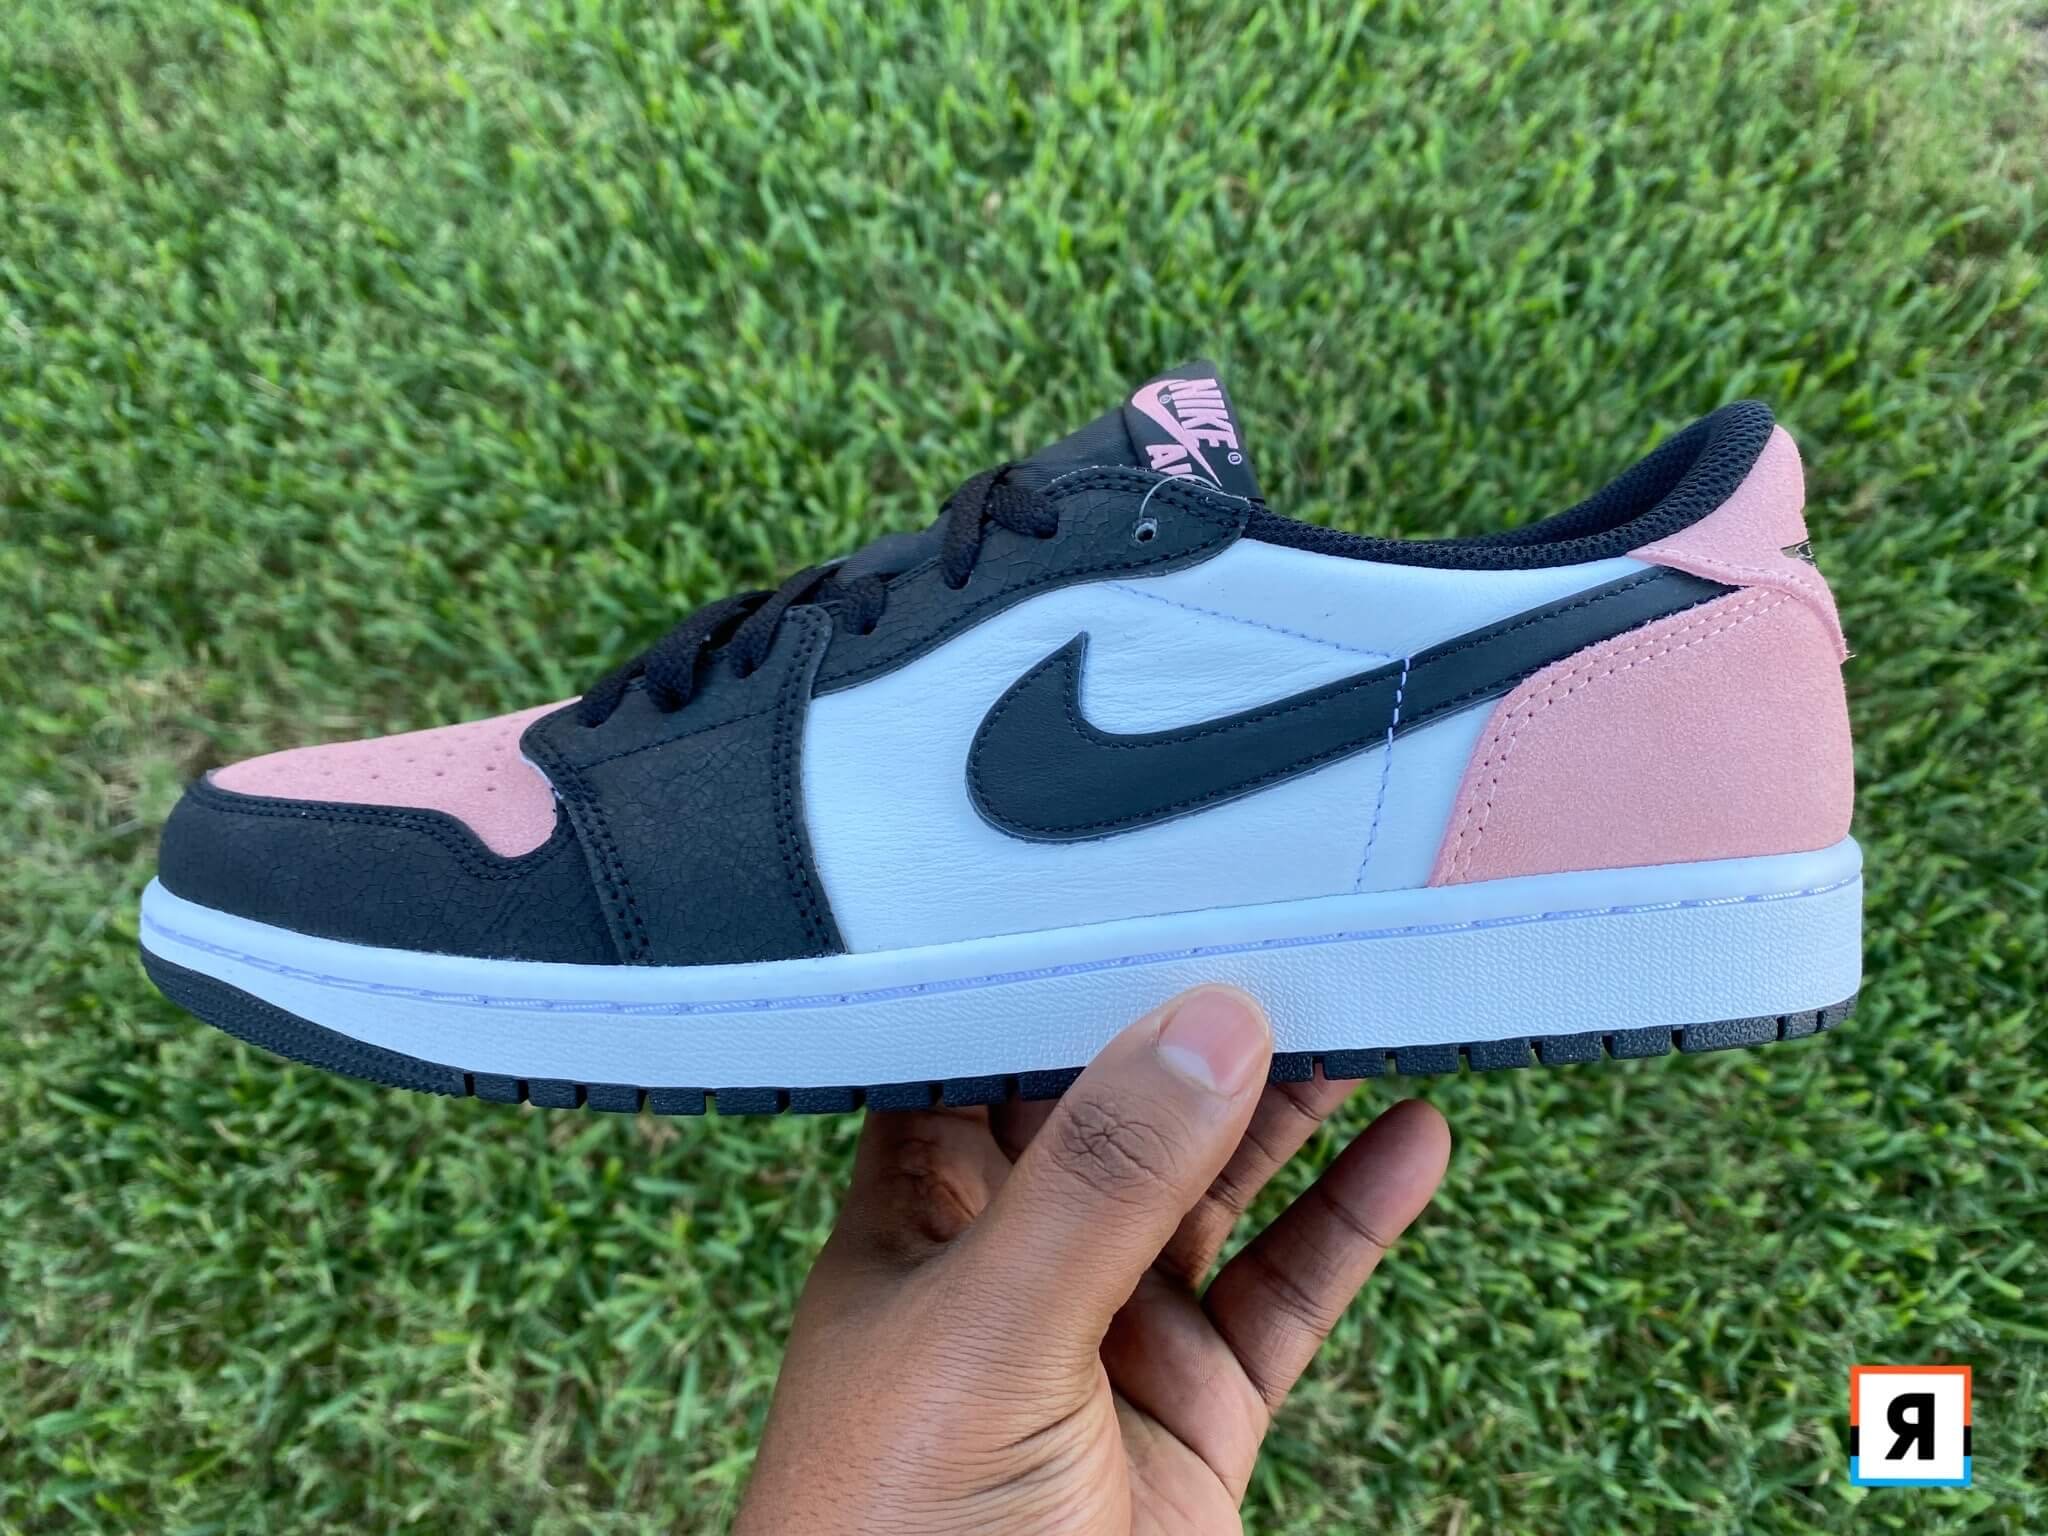 A Detailed Review Of The Air Jordan 1 Low OG “Bleached Coral”